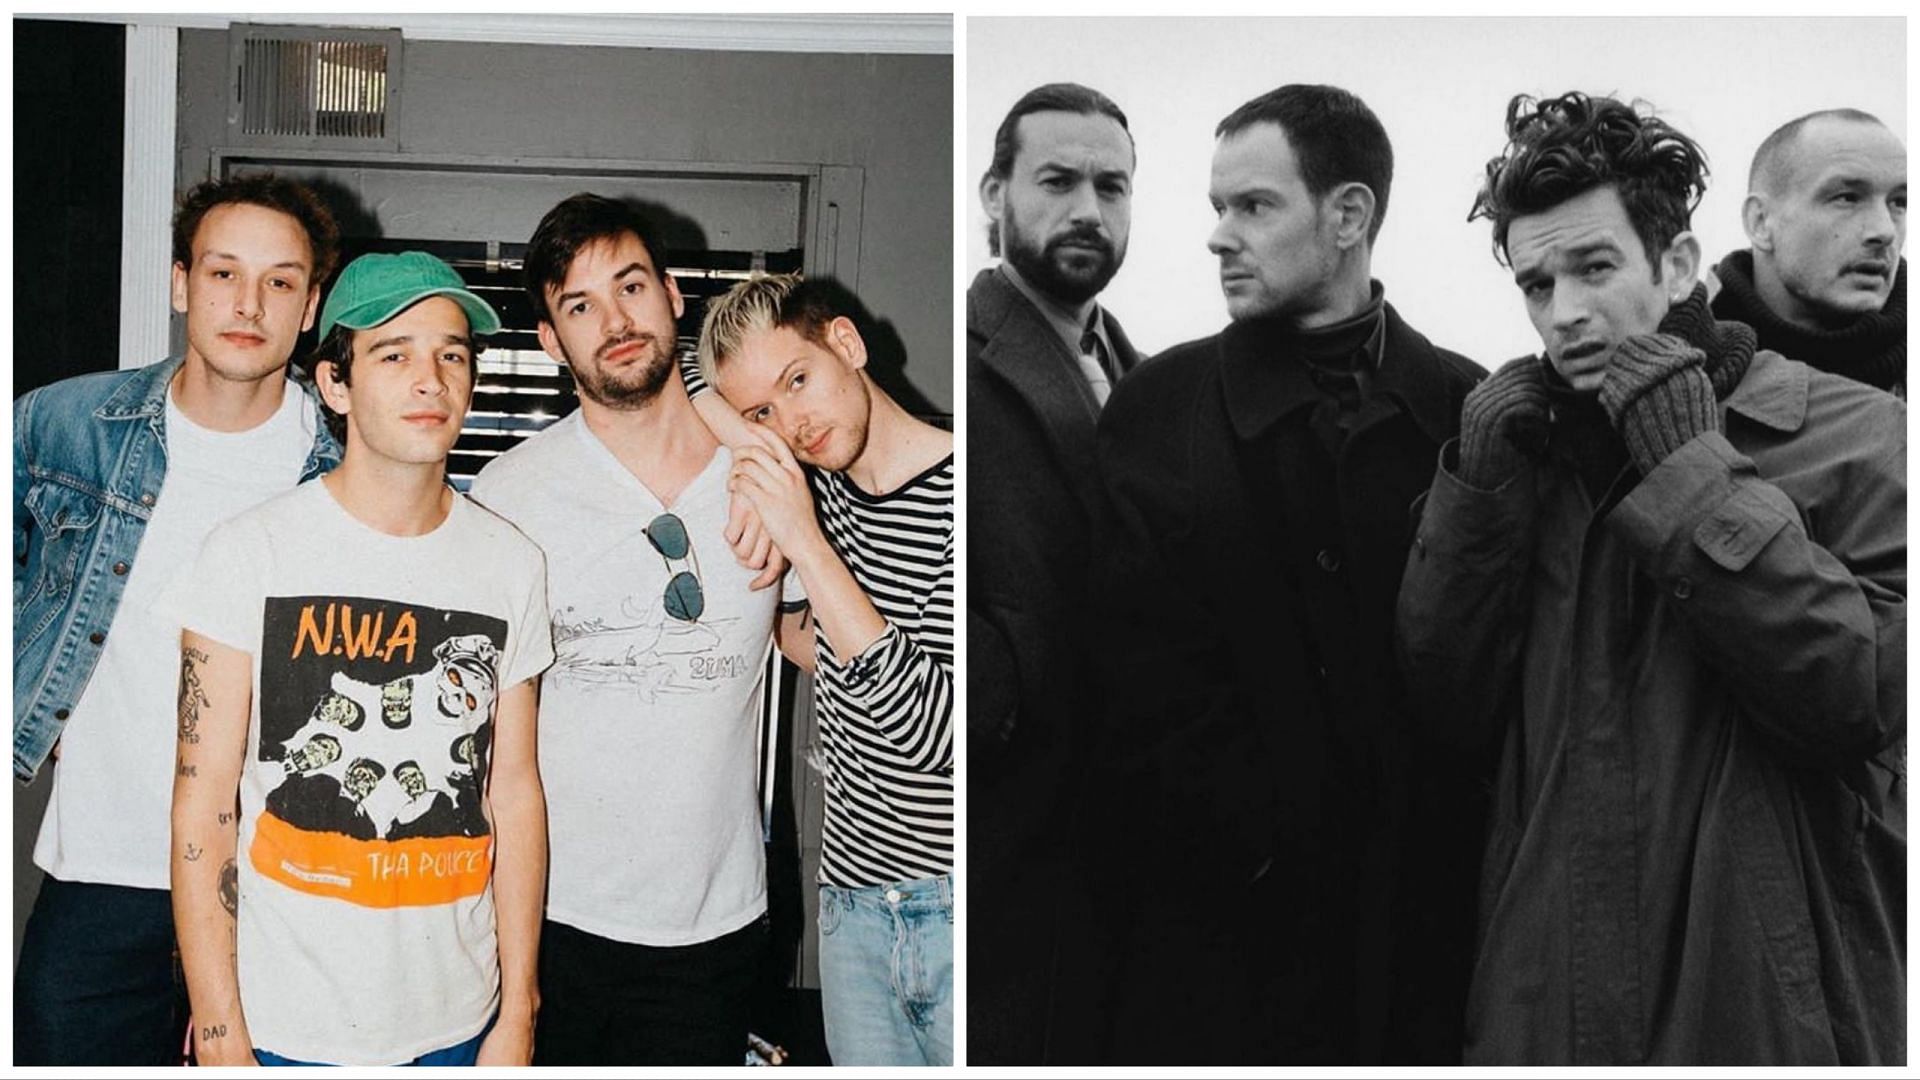 Two portraits of The 1975 (Images via official Instagram @band1975)